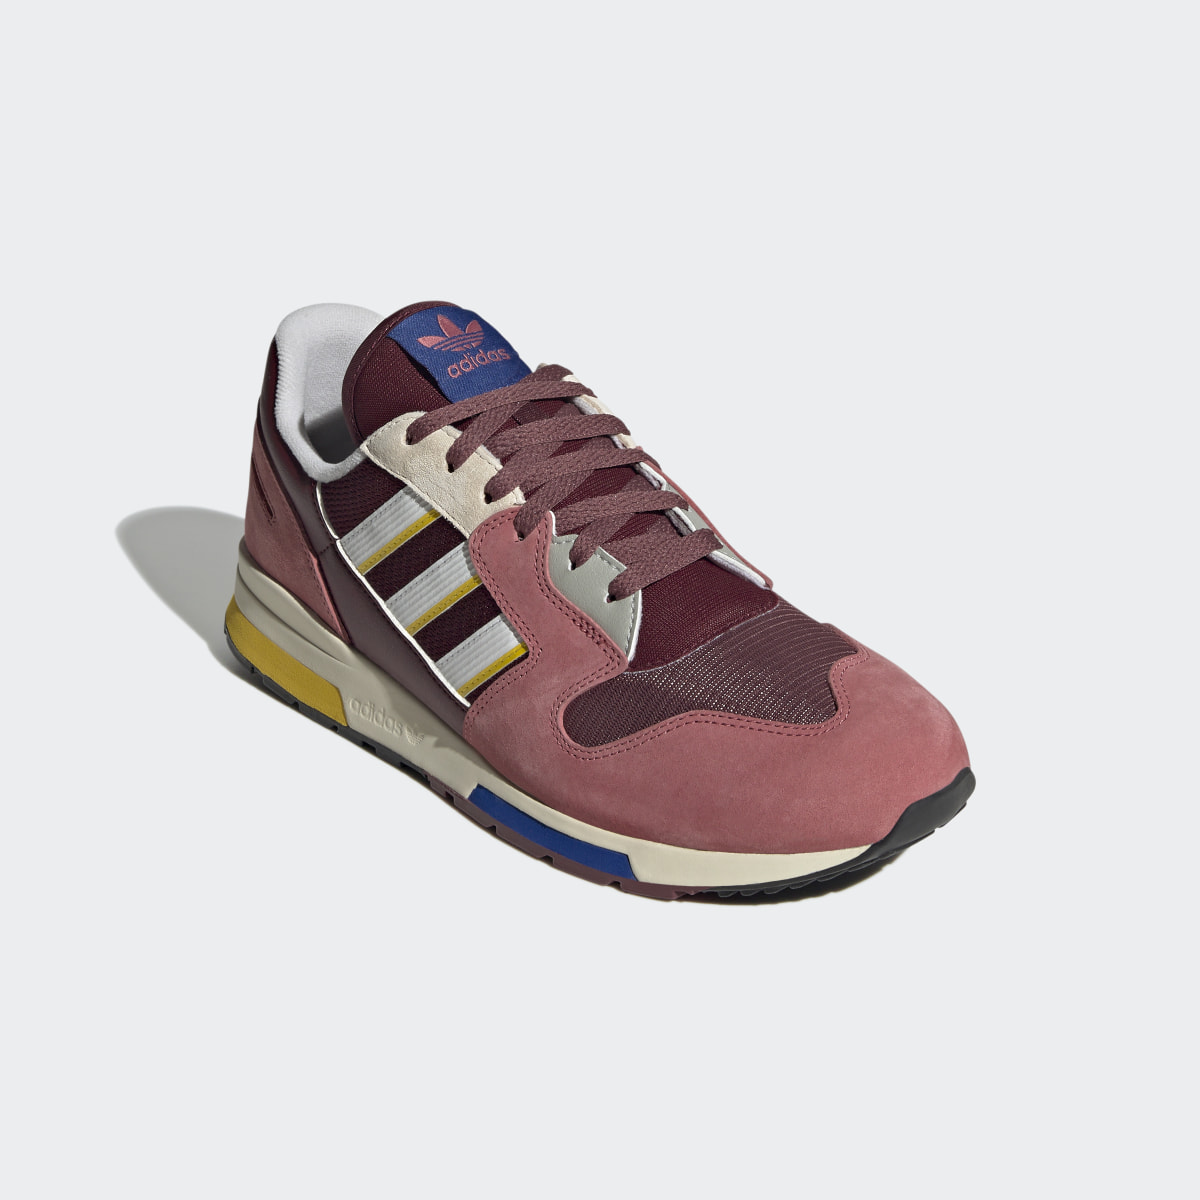 Adidas ZX 420 Shoes. 5